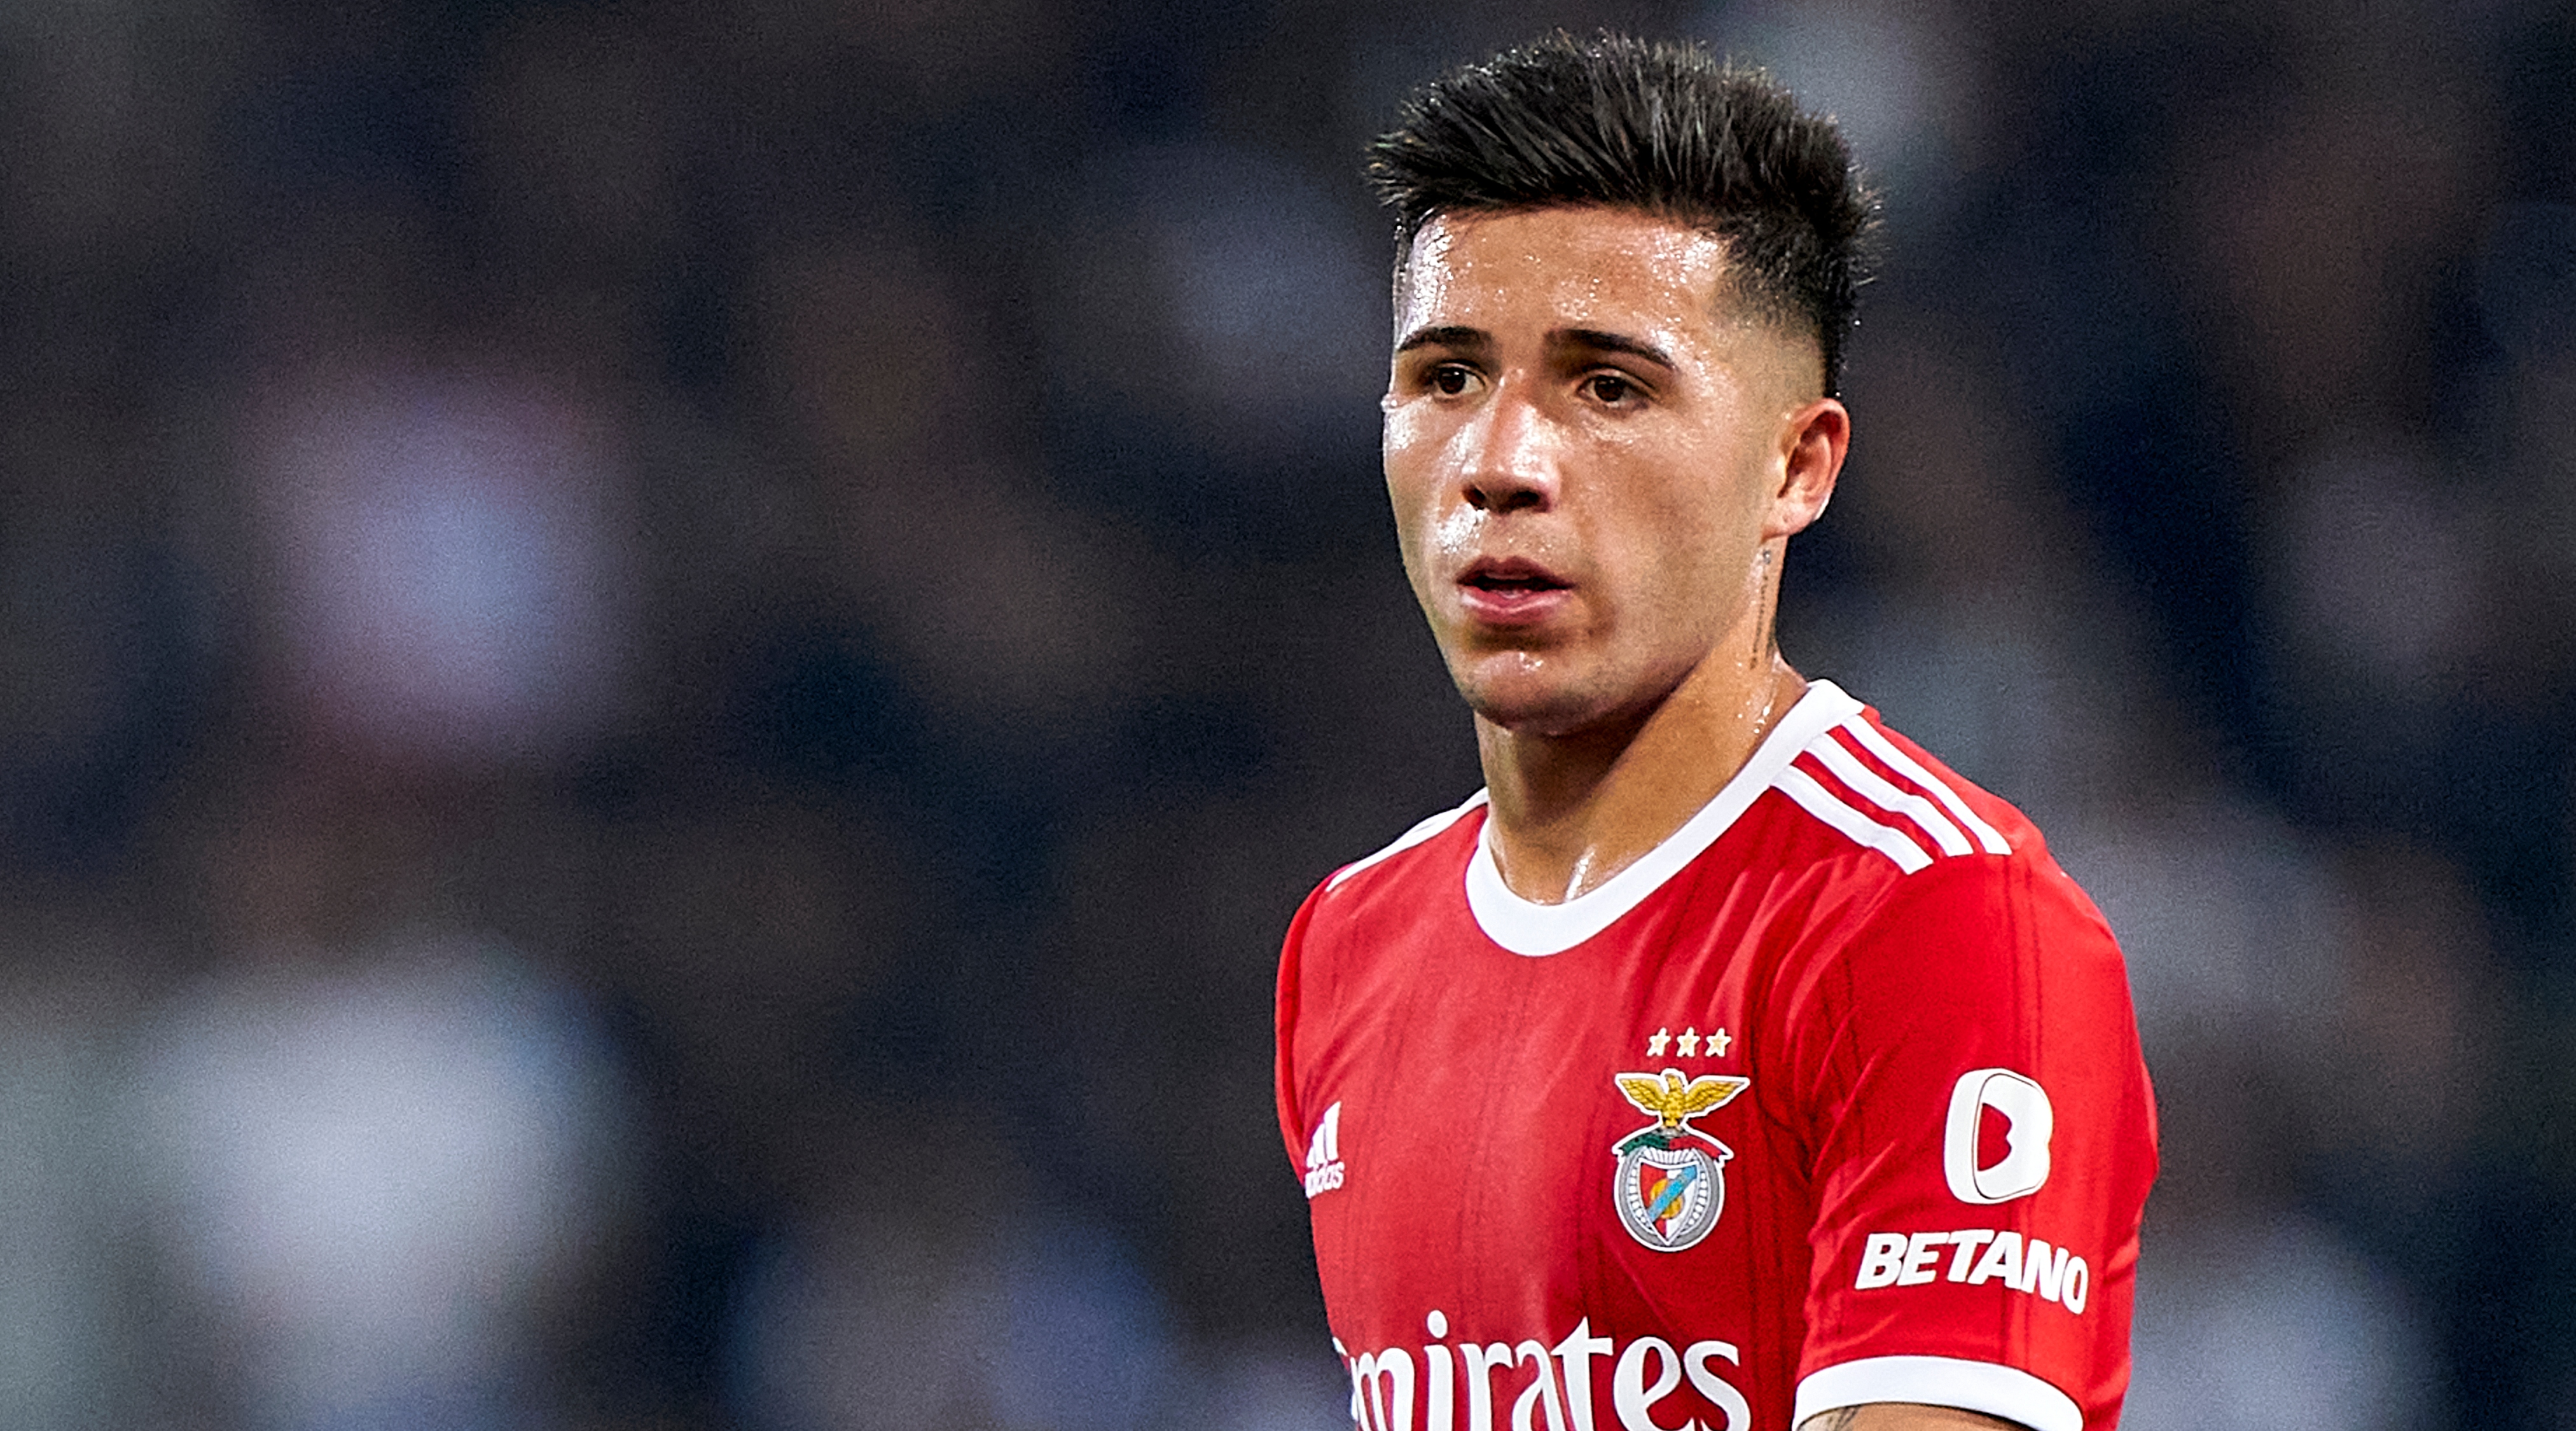 Enzo Fernandez of Benfica during the Primeira Liga match between Vitoria Guimaraes and Benfica at the Estadio Dom Afonso Henriques in Guimaraes, Portugal on October 1, 2022